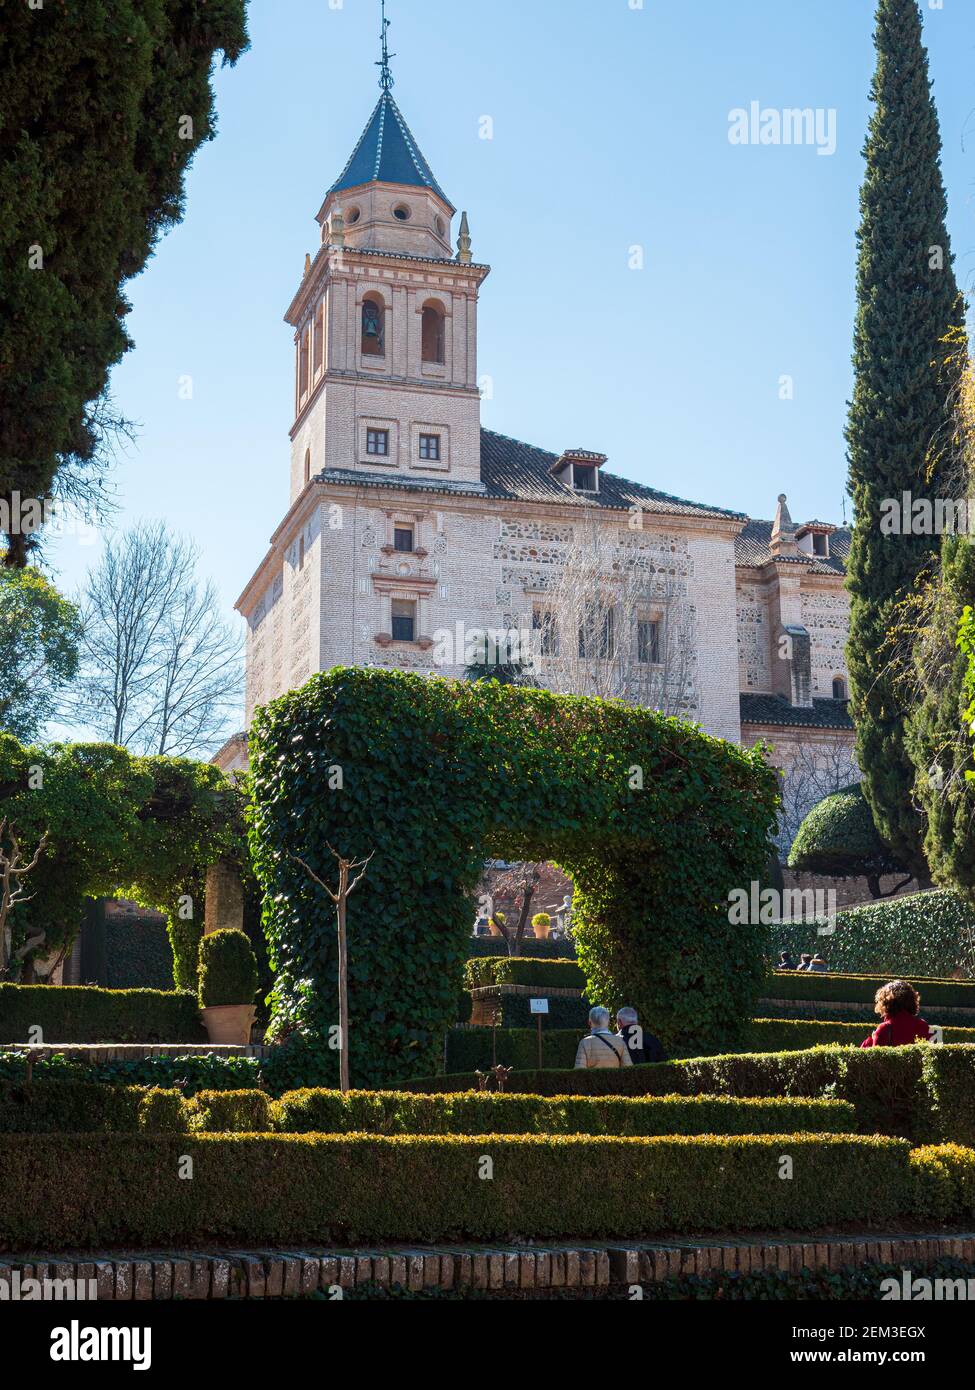 Tower and terraced gardens at The Alhambra, Granada, Spain. Stock Photo